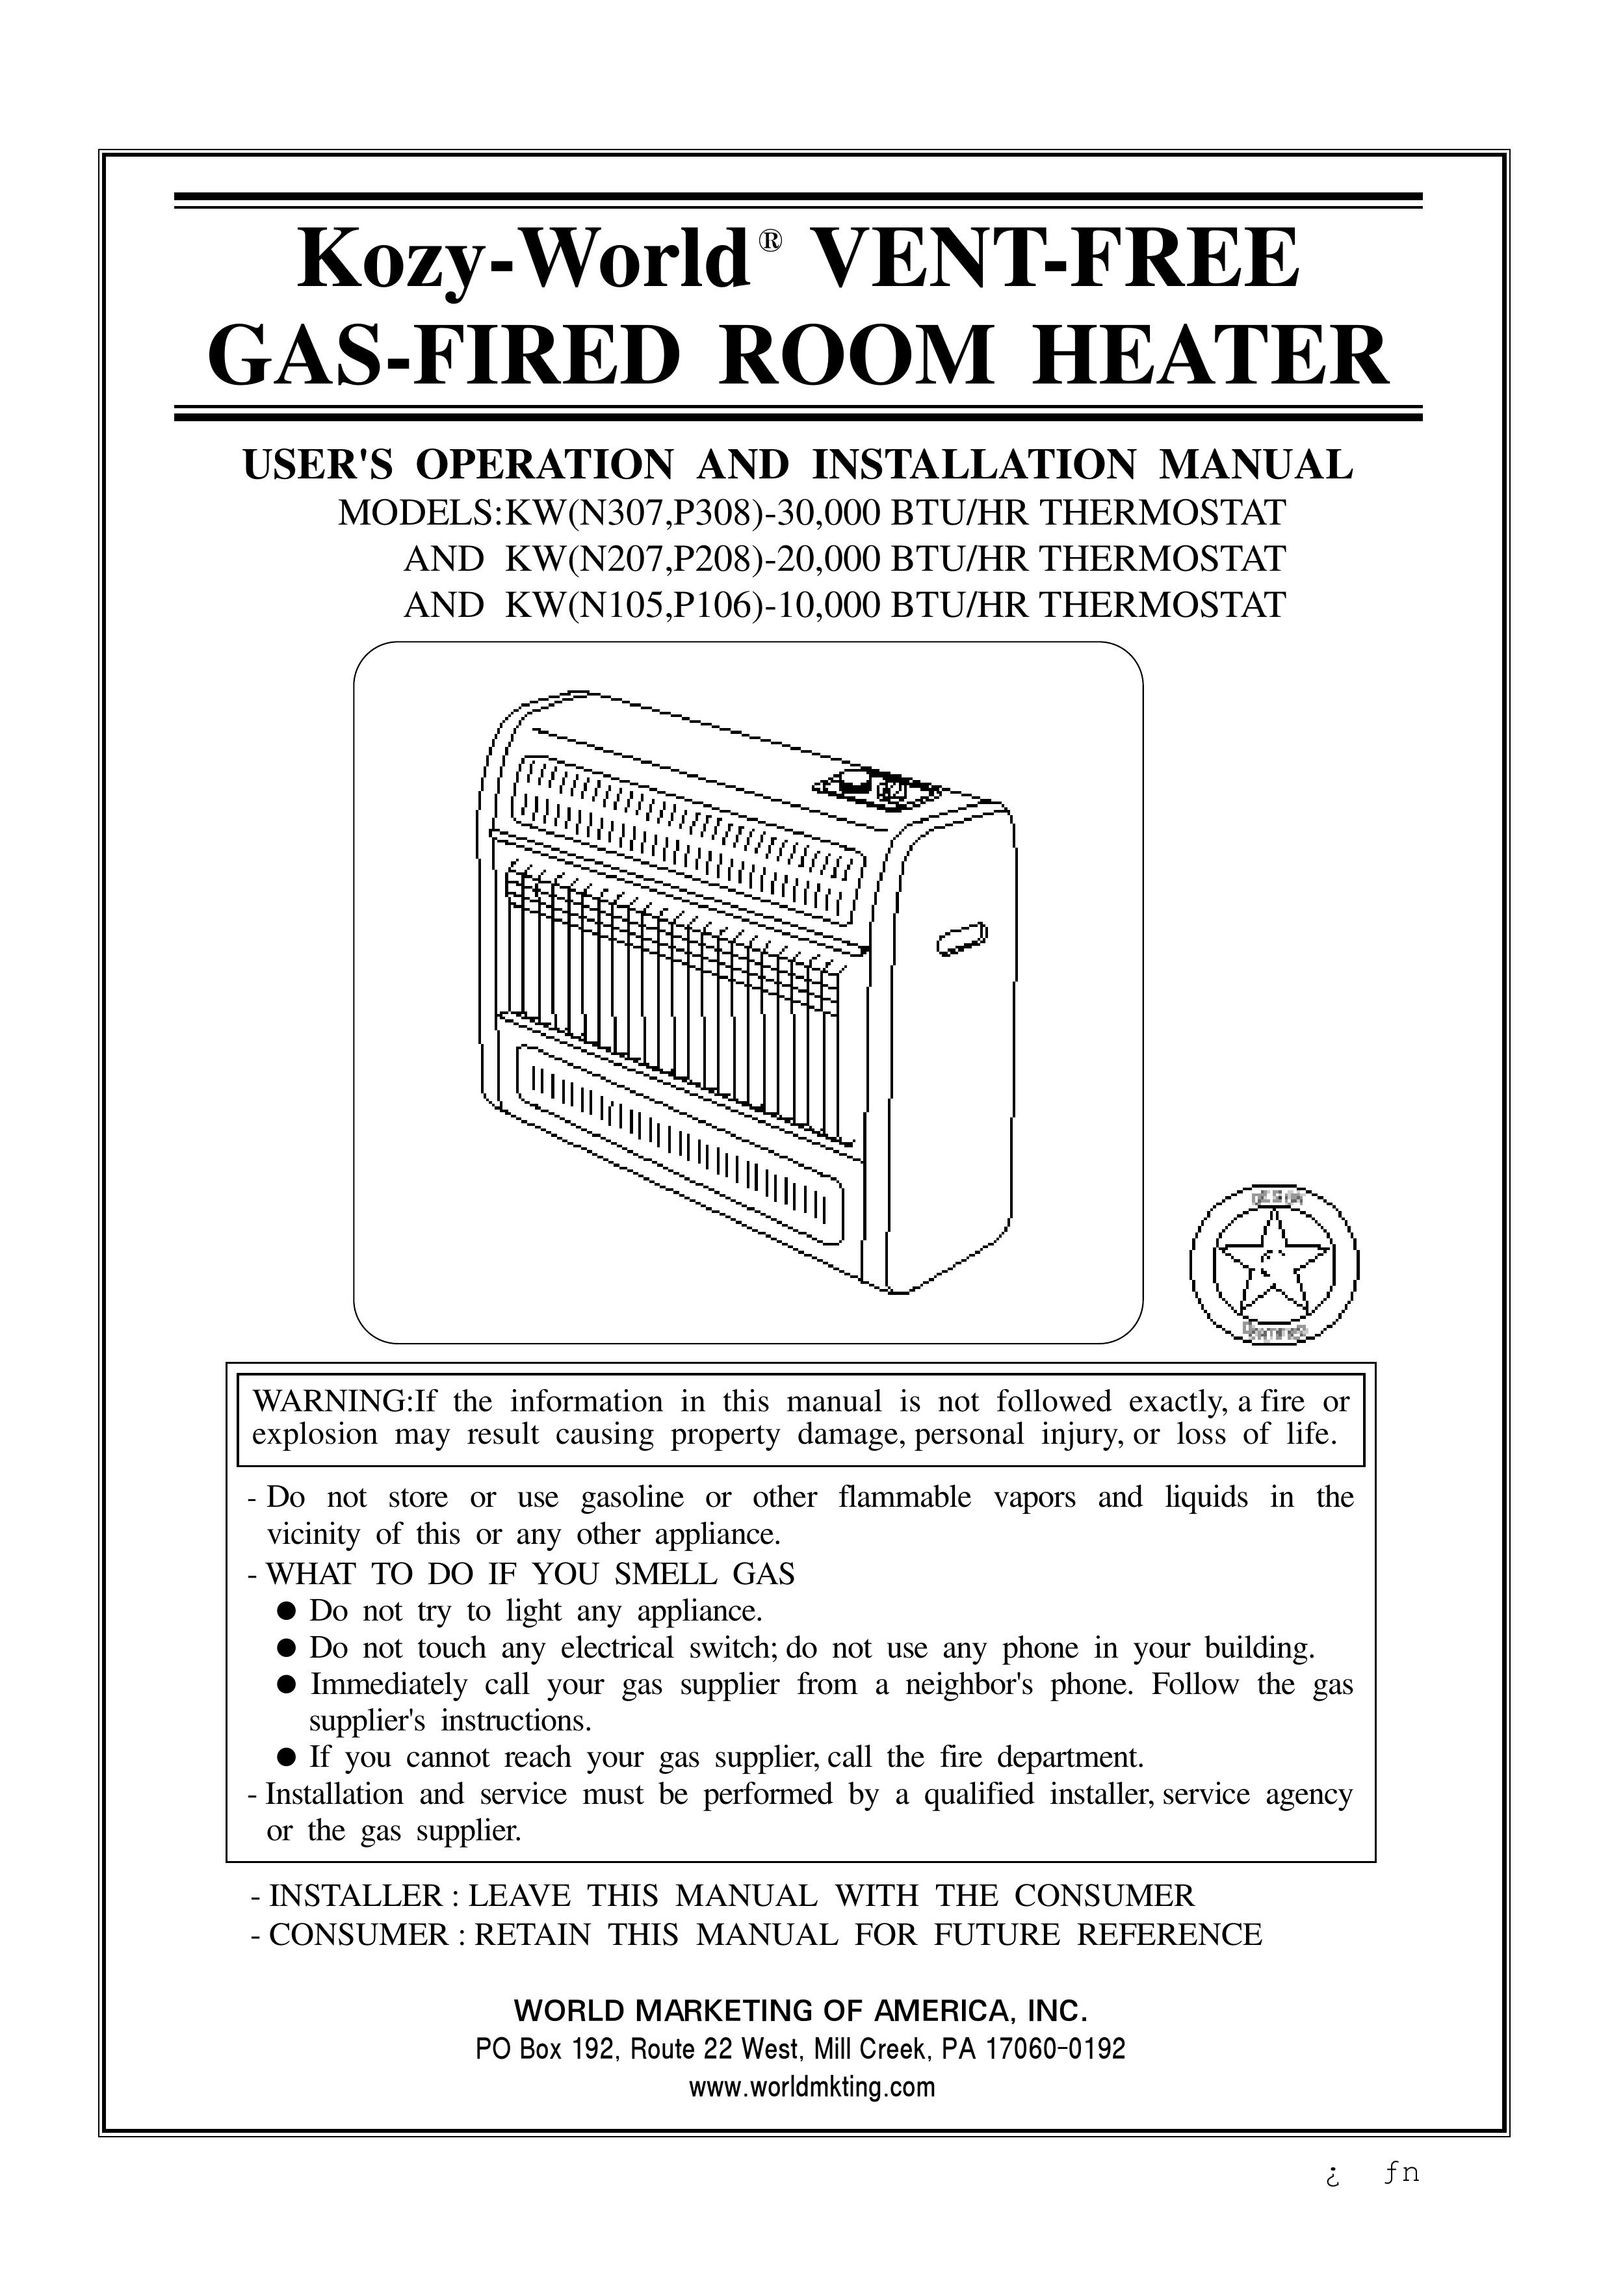 Air King KW(N307,P308) Thermostat User Manual (Page 1)